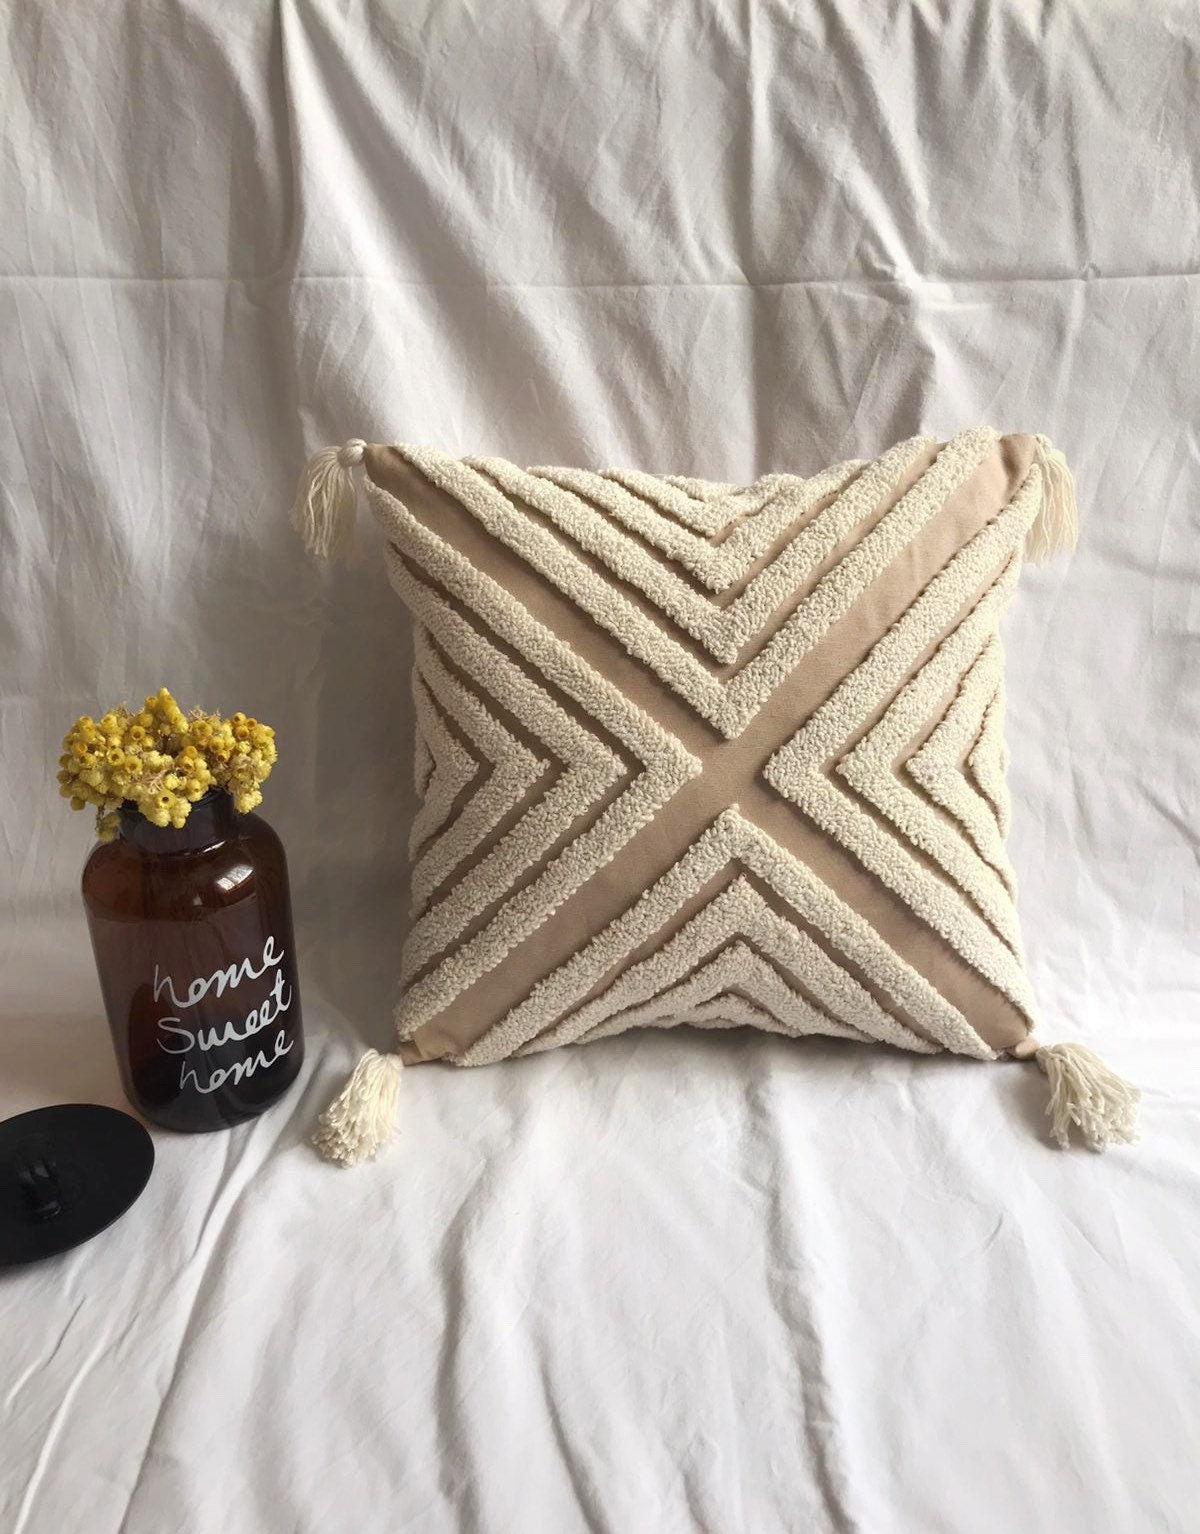 Punch Needle Pillow Case - Tufted Pillow Cover